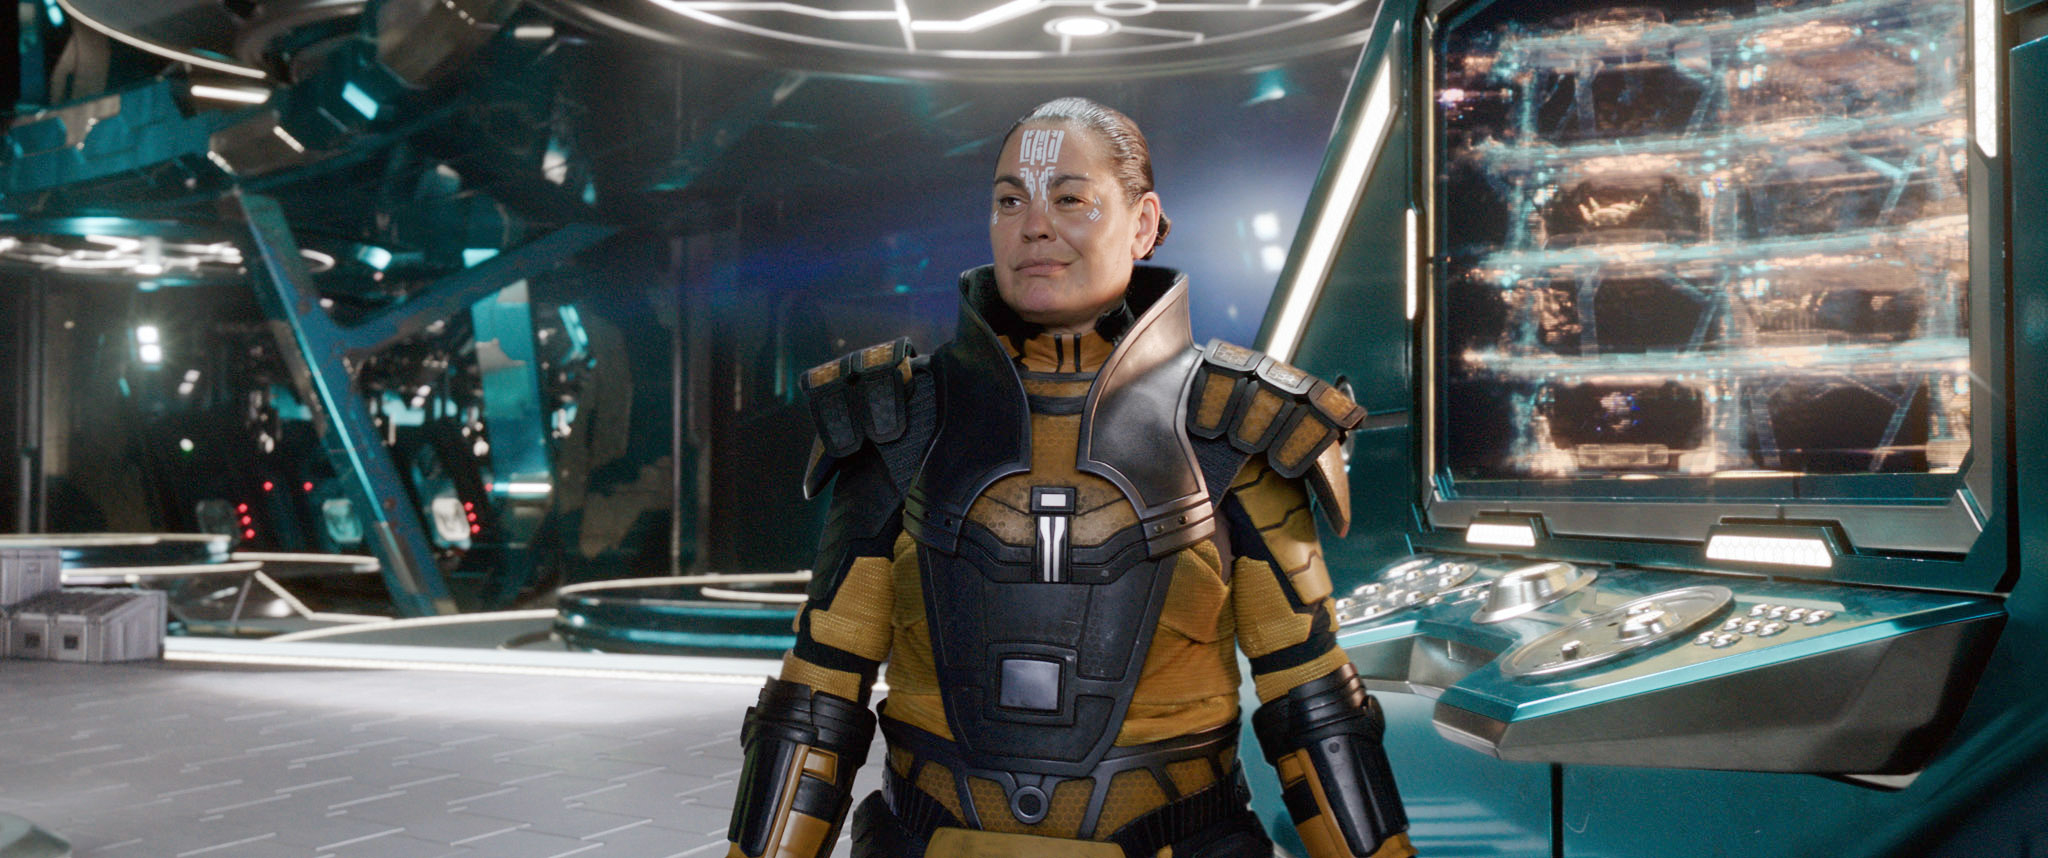 Michelle Yeoh in a futuristic suit as Captain Philippa Georgiou from Star Trek: Discovery stands on a spaceship bridge